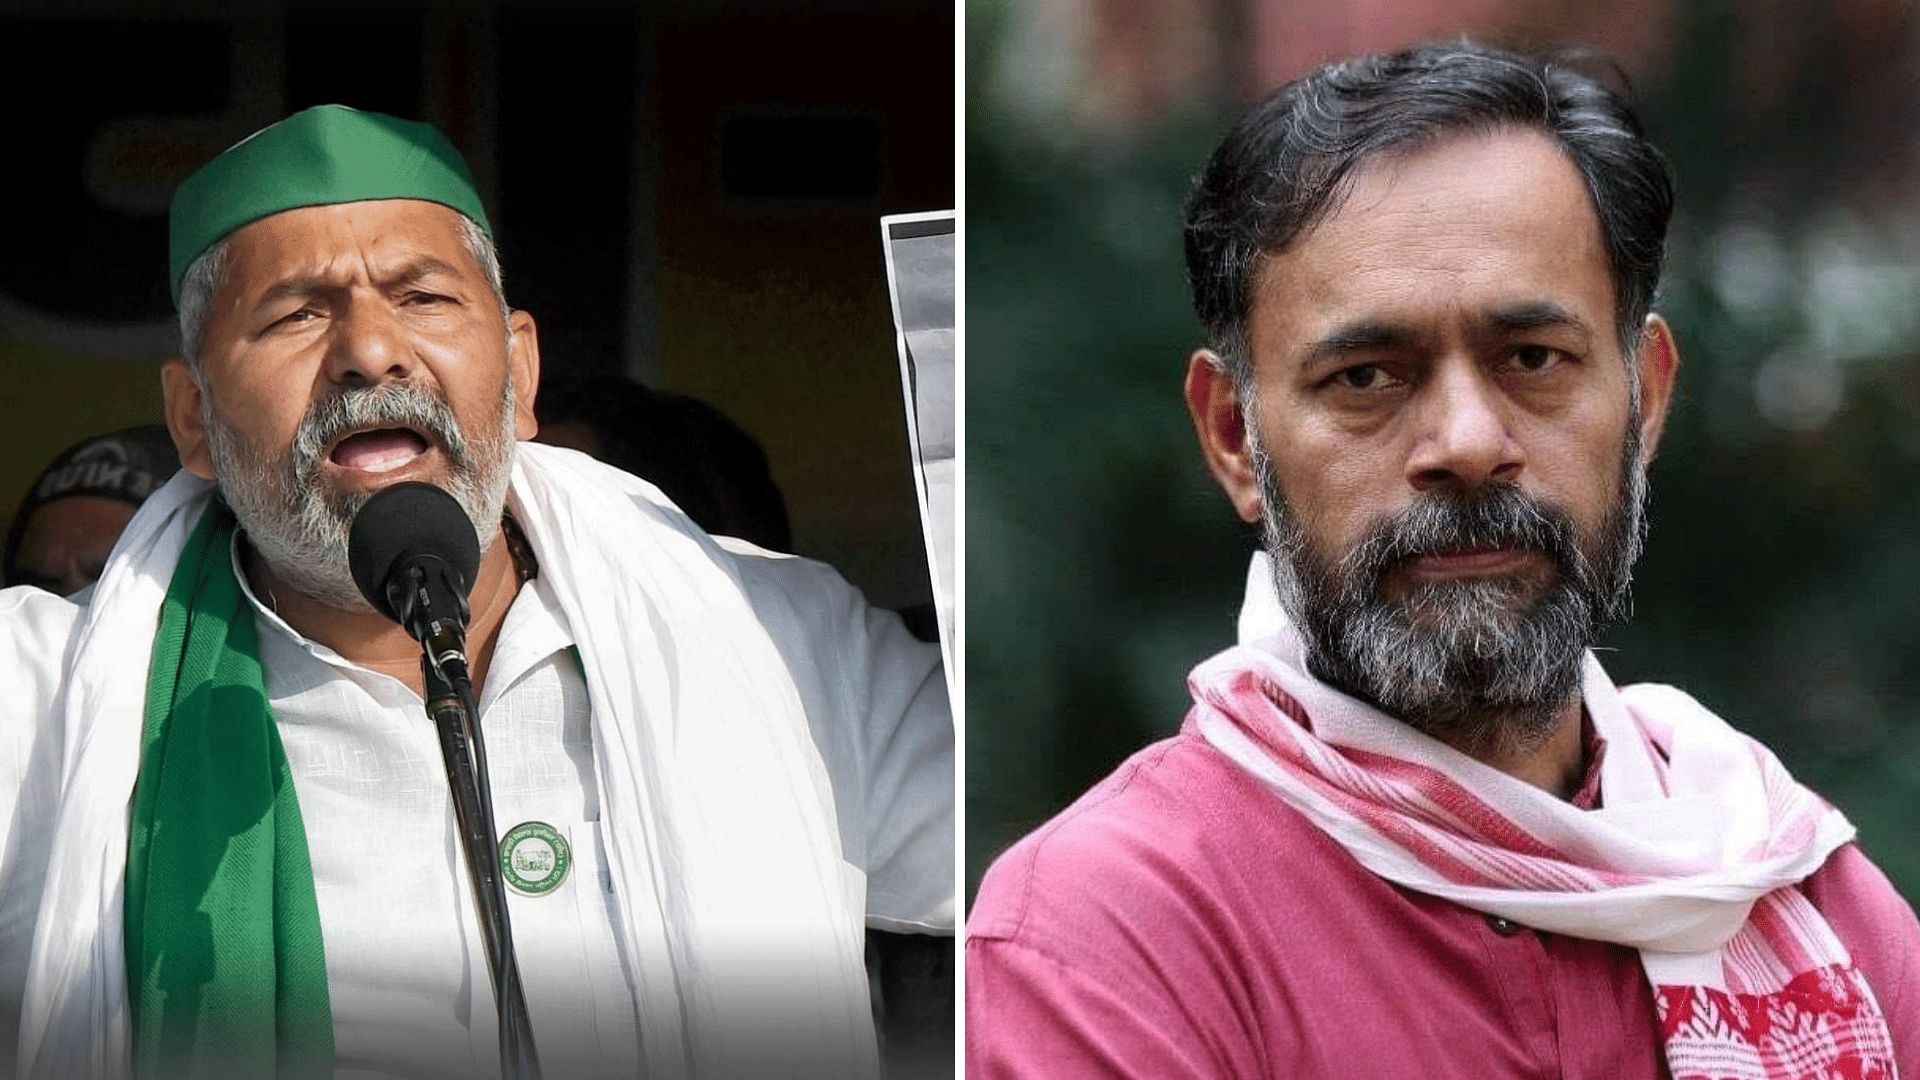 <div class="paragraphs"><p>Farmer leaders Rakesh Tikait and Yogendra Yadav on Tuesday, 1 February, criticised the lack of allocation to the agriculture industry under the 2022 Union Budget.</p></div>